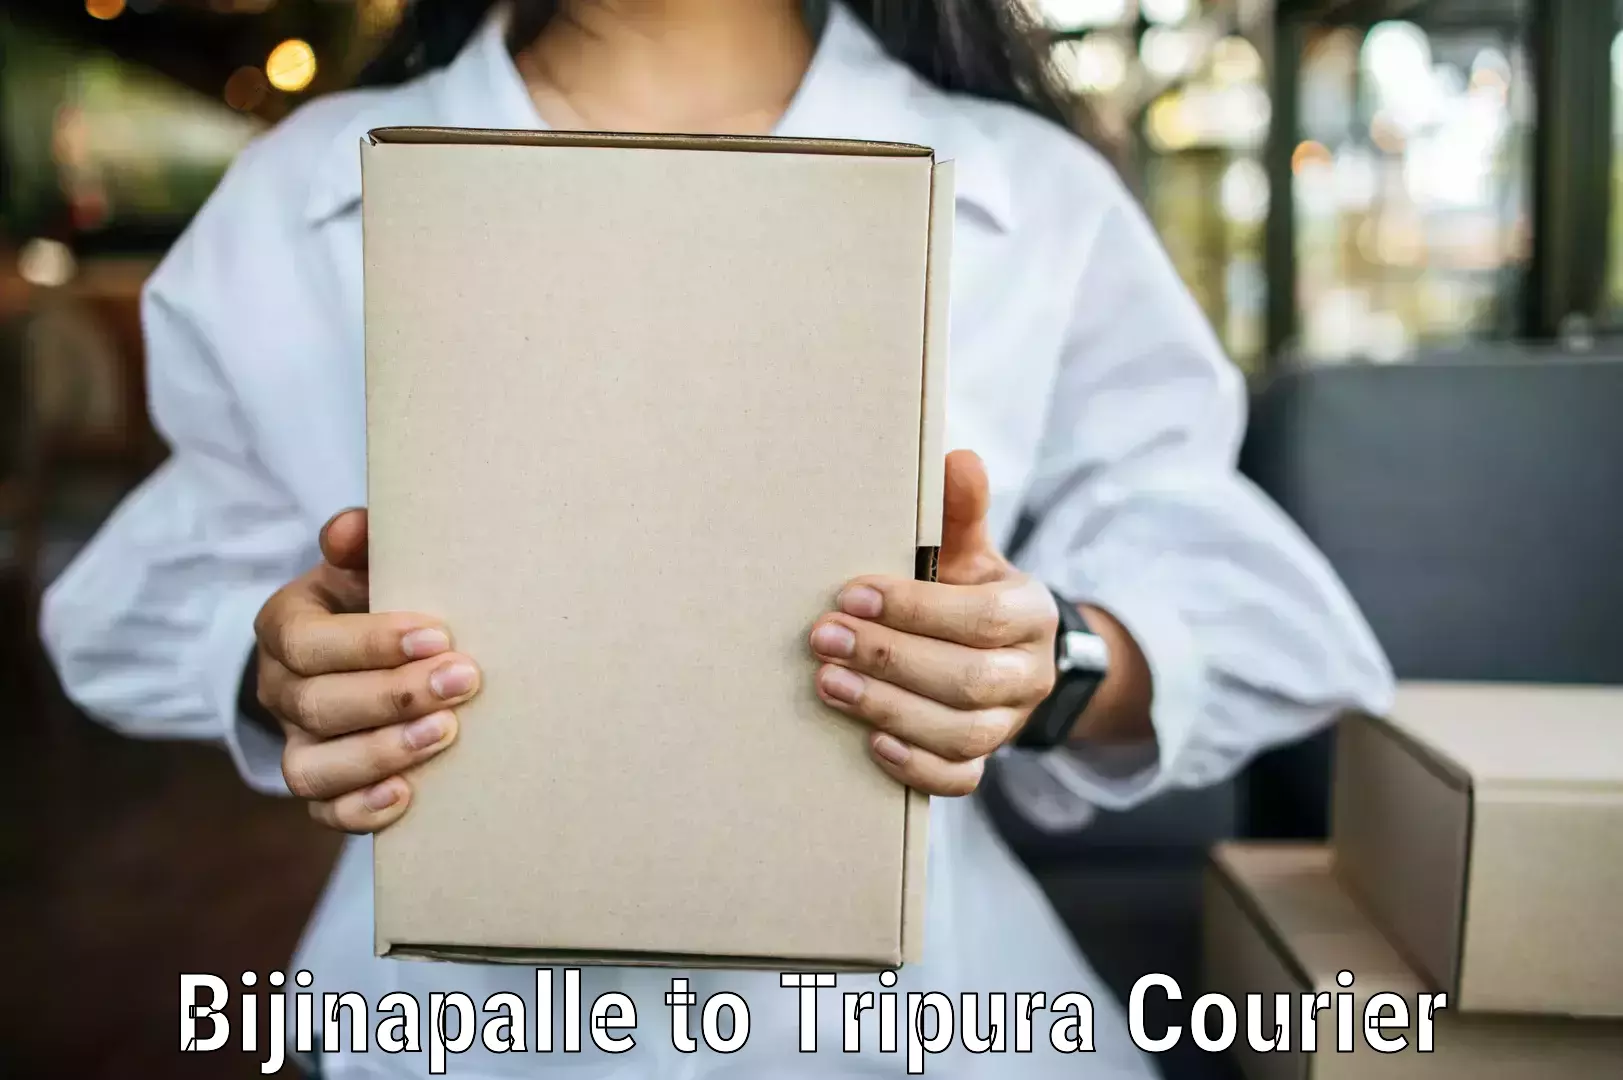 Nationwide courier service Bijinapalle to Udaipur Tripura